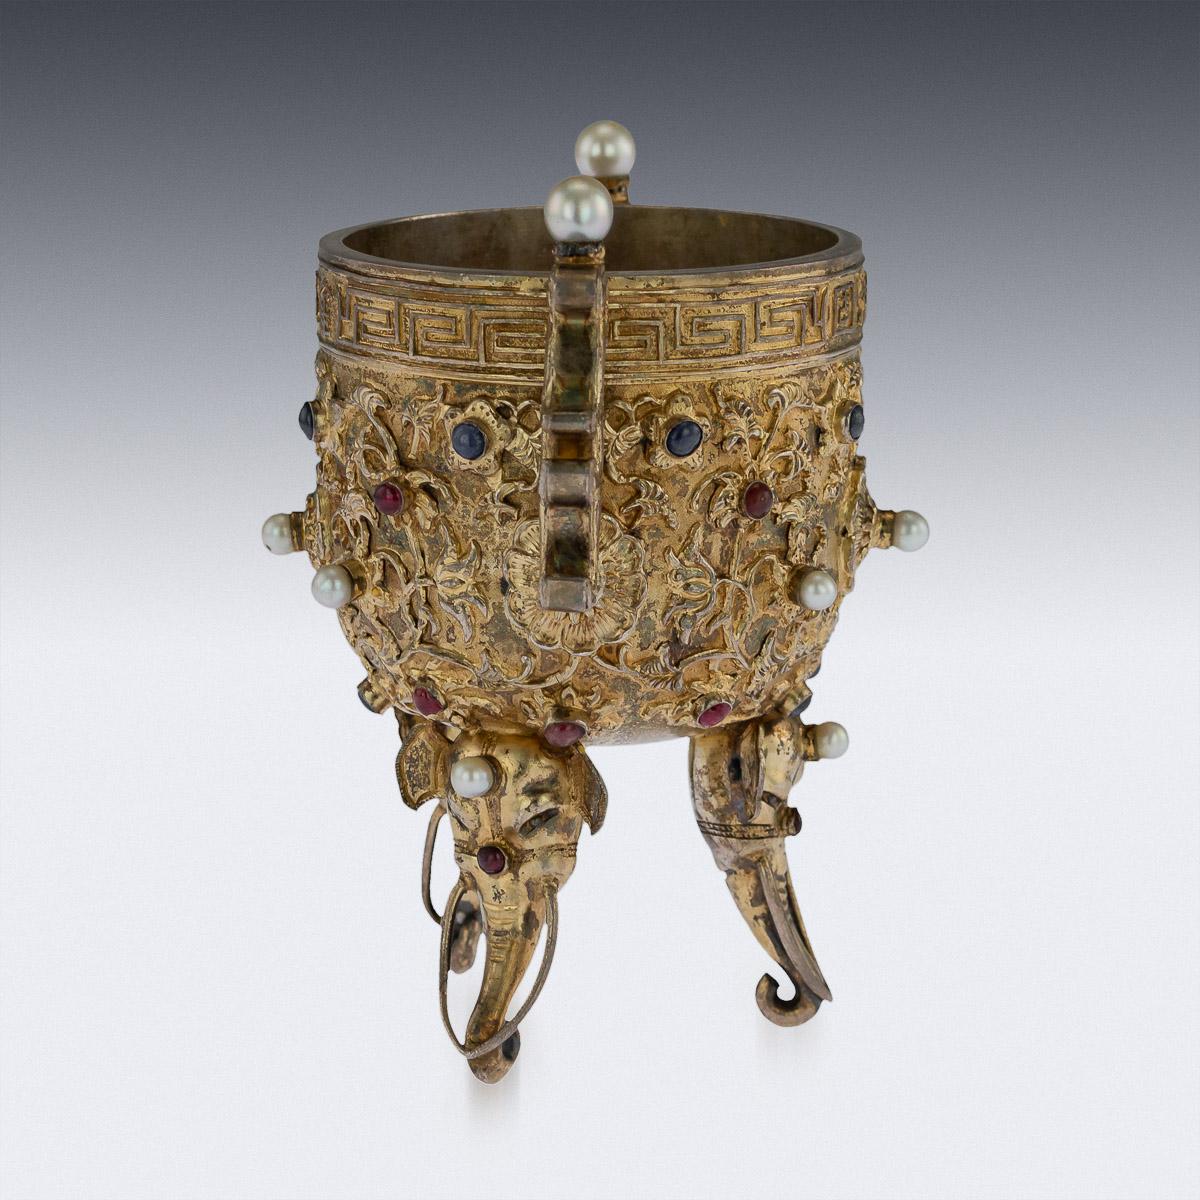 19th Century Antique Chinese Impressive Gem Set and Silver Gilt Emperors Cup, circa 1880